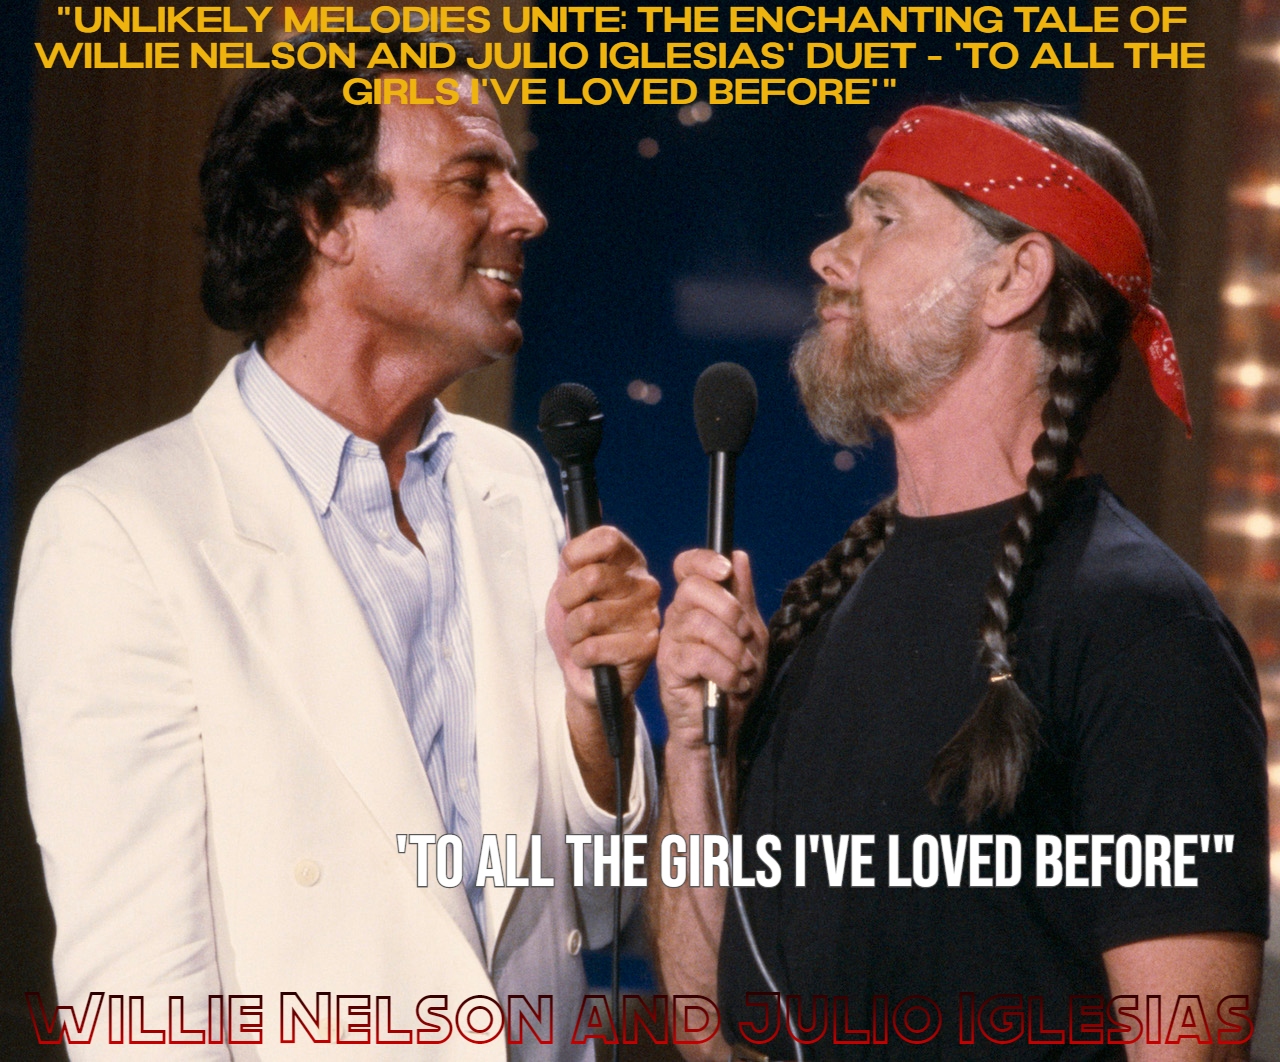 “Unlikely Melodies Unite: The Enchanting Tale of Willie Nelson and Julio Iglesias’ Duet – ‘To All the Girls I’ve Loved Before'”